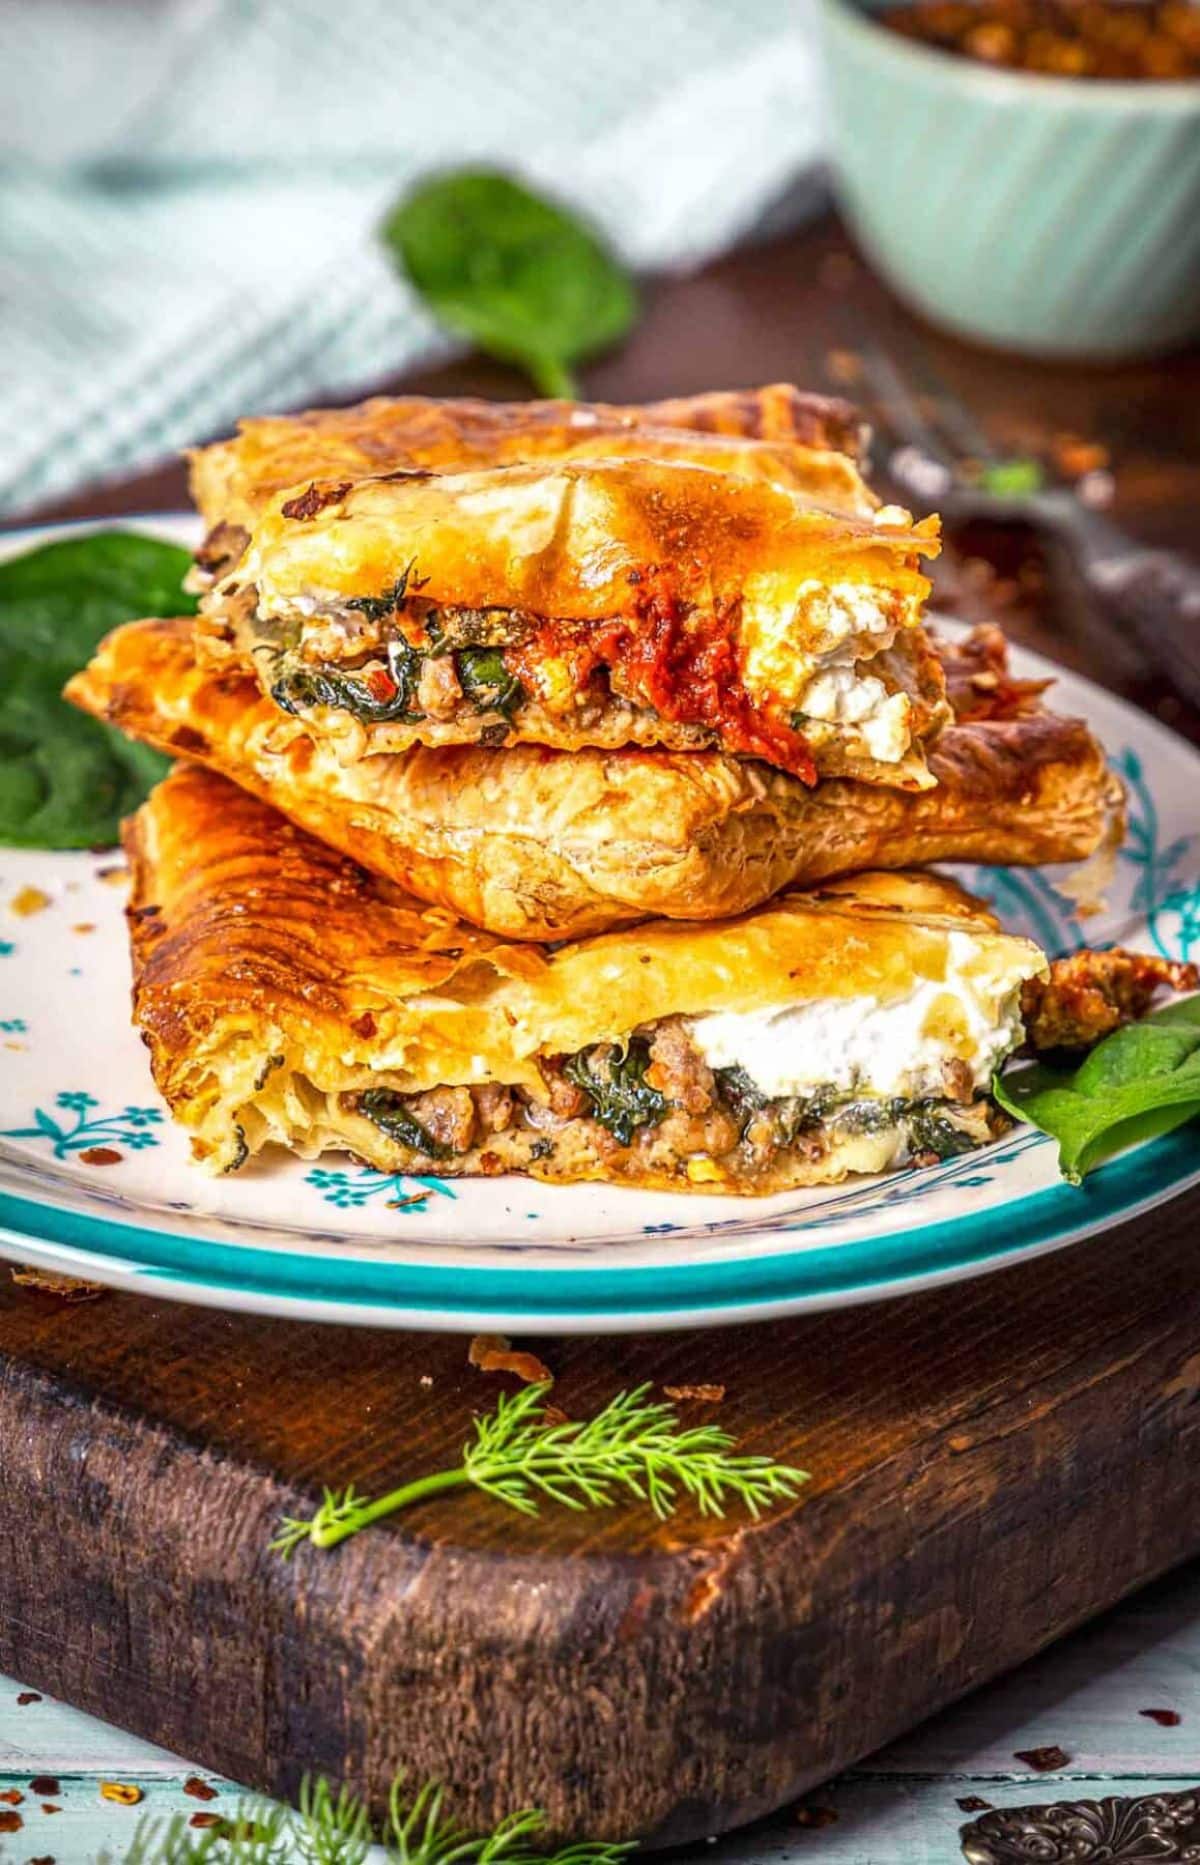 Scrumptious spicy italian sausage and spinach slab pie on a colorful plate.